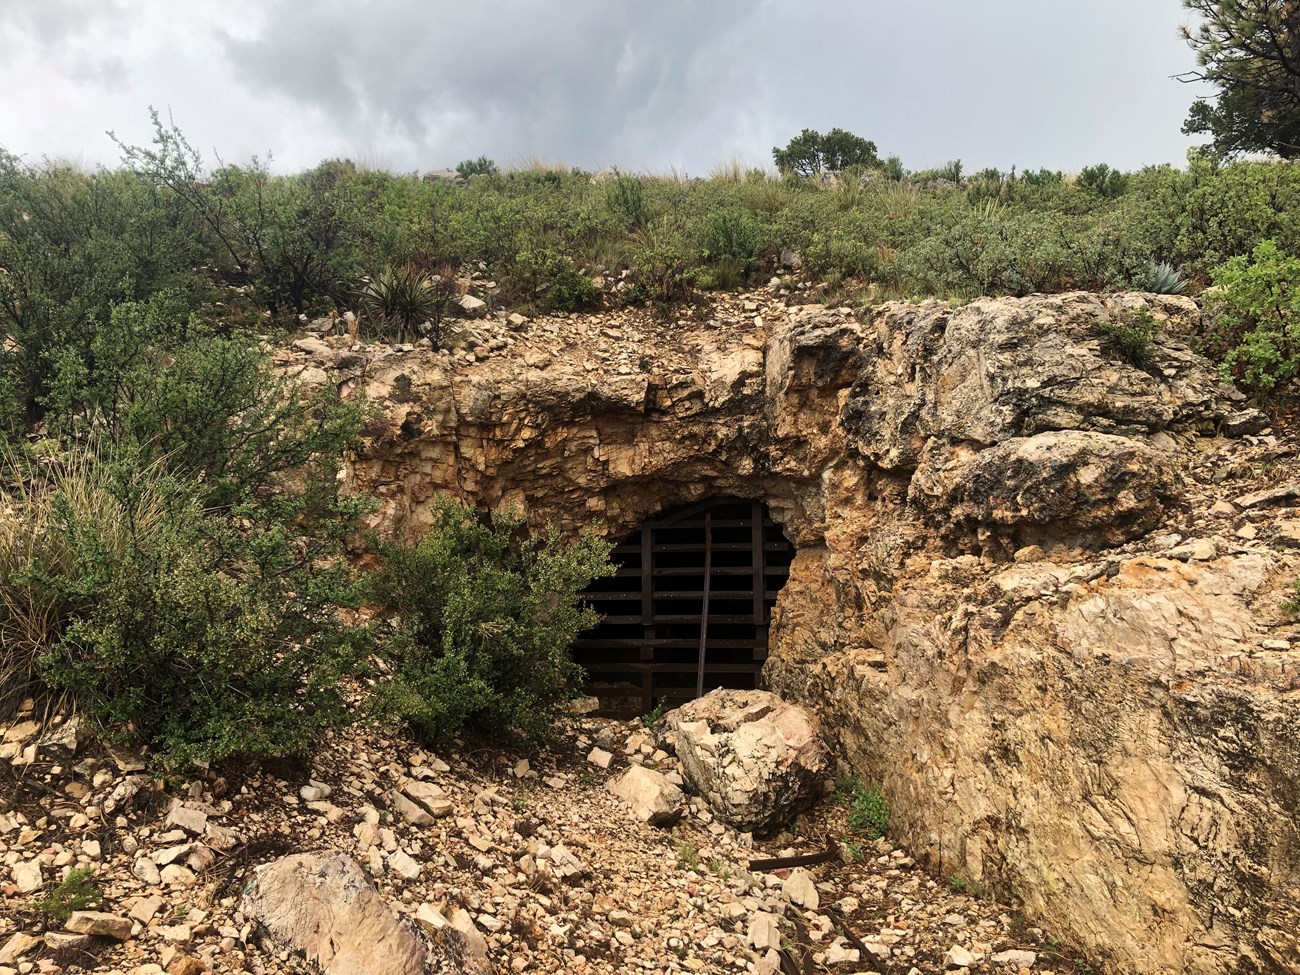 A mine opening in a hillside is closed with a metal gate to allow bats to pass through